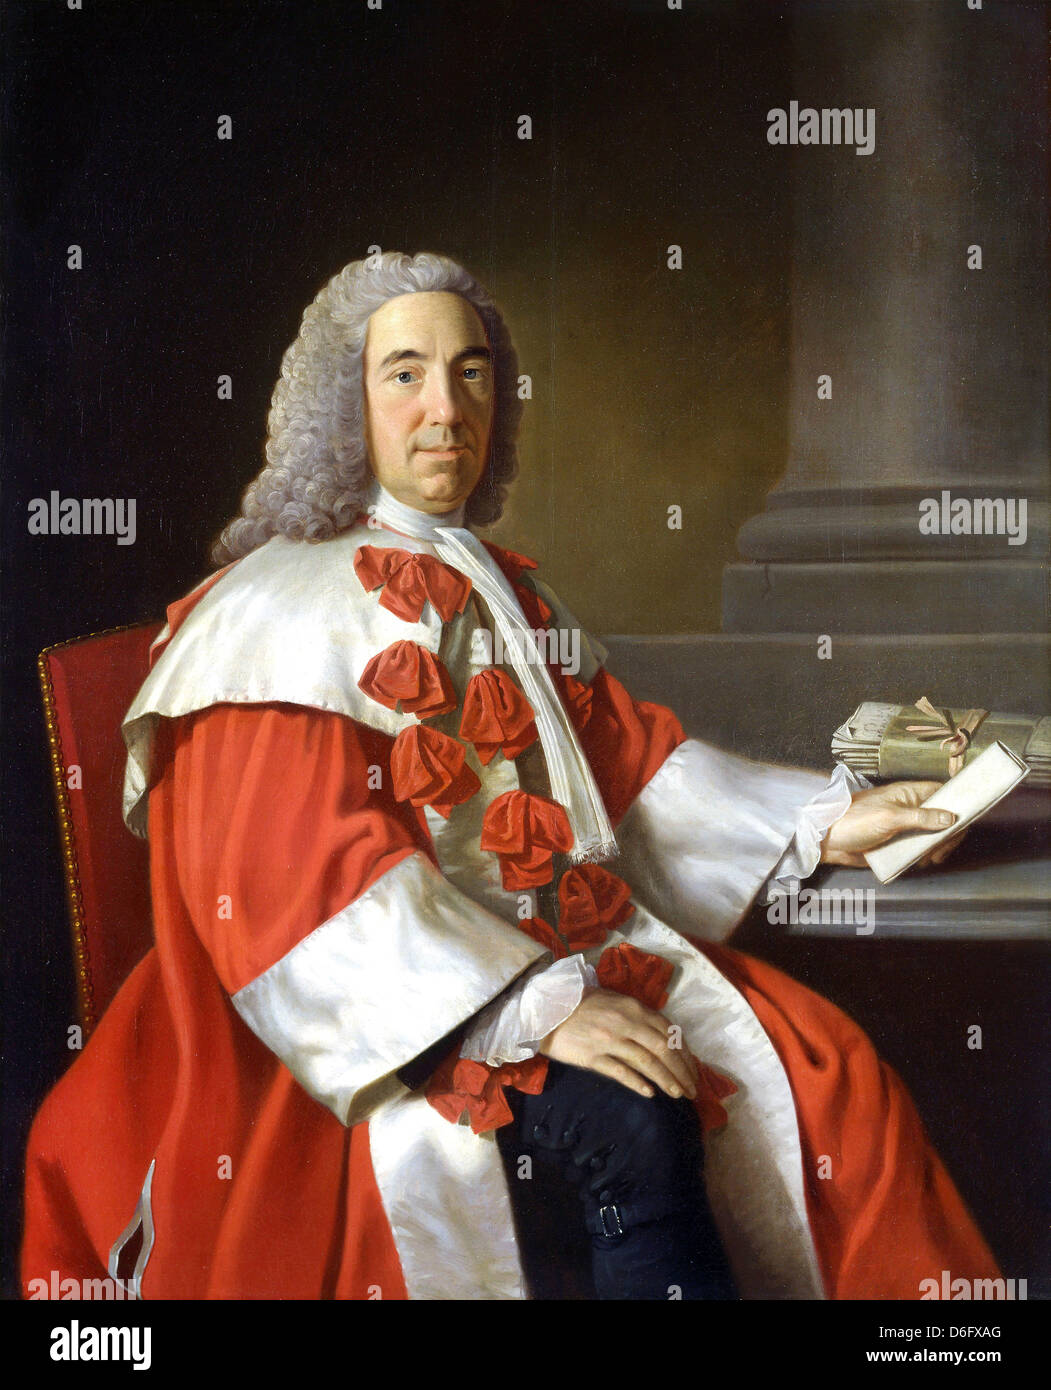 Allan Ramsay, Alexander Boswell, Lord Auchinleck 1754-1755 Oil on canvas. Yale Center for British Art, New Haven, Connecticut Stock Photo